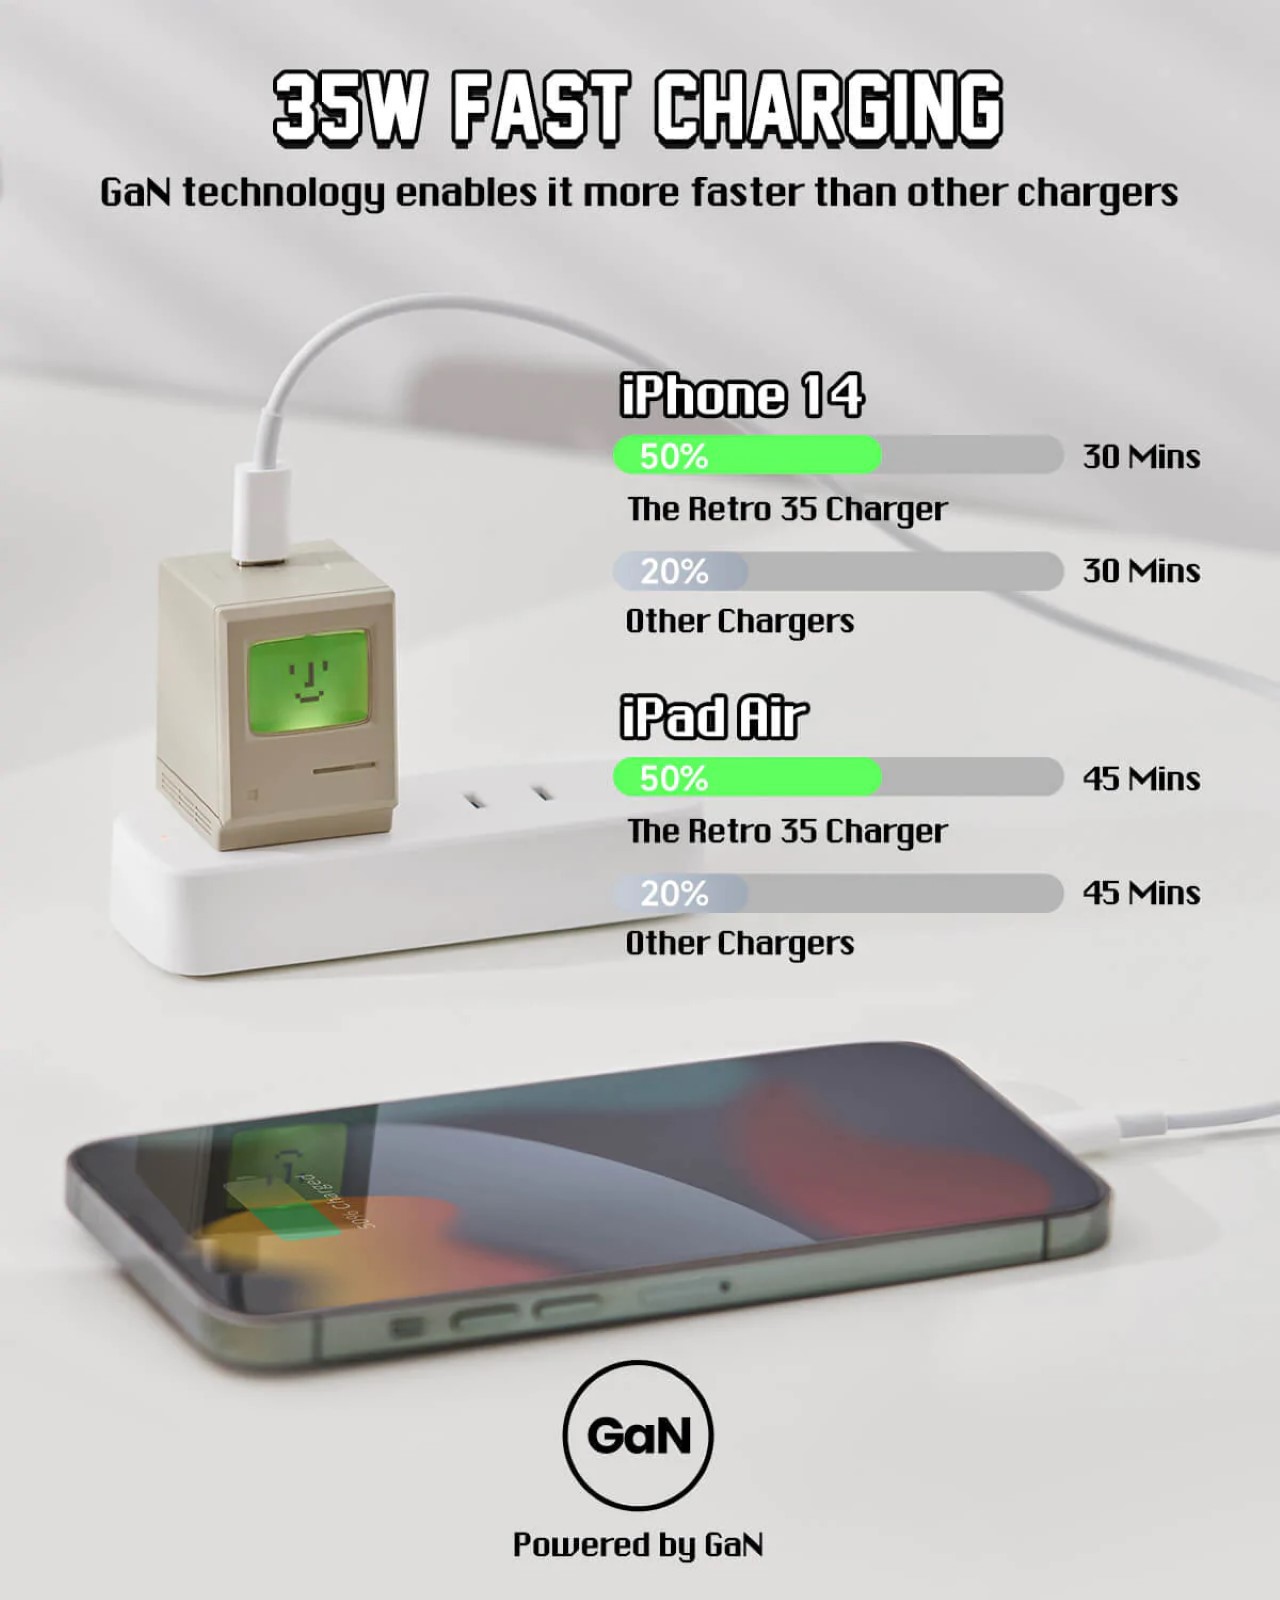 Shargeek’s tiny 35W GaN fast charger is an adorable retro throwback for all Apple fans!